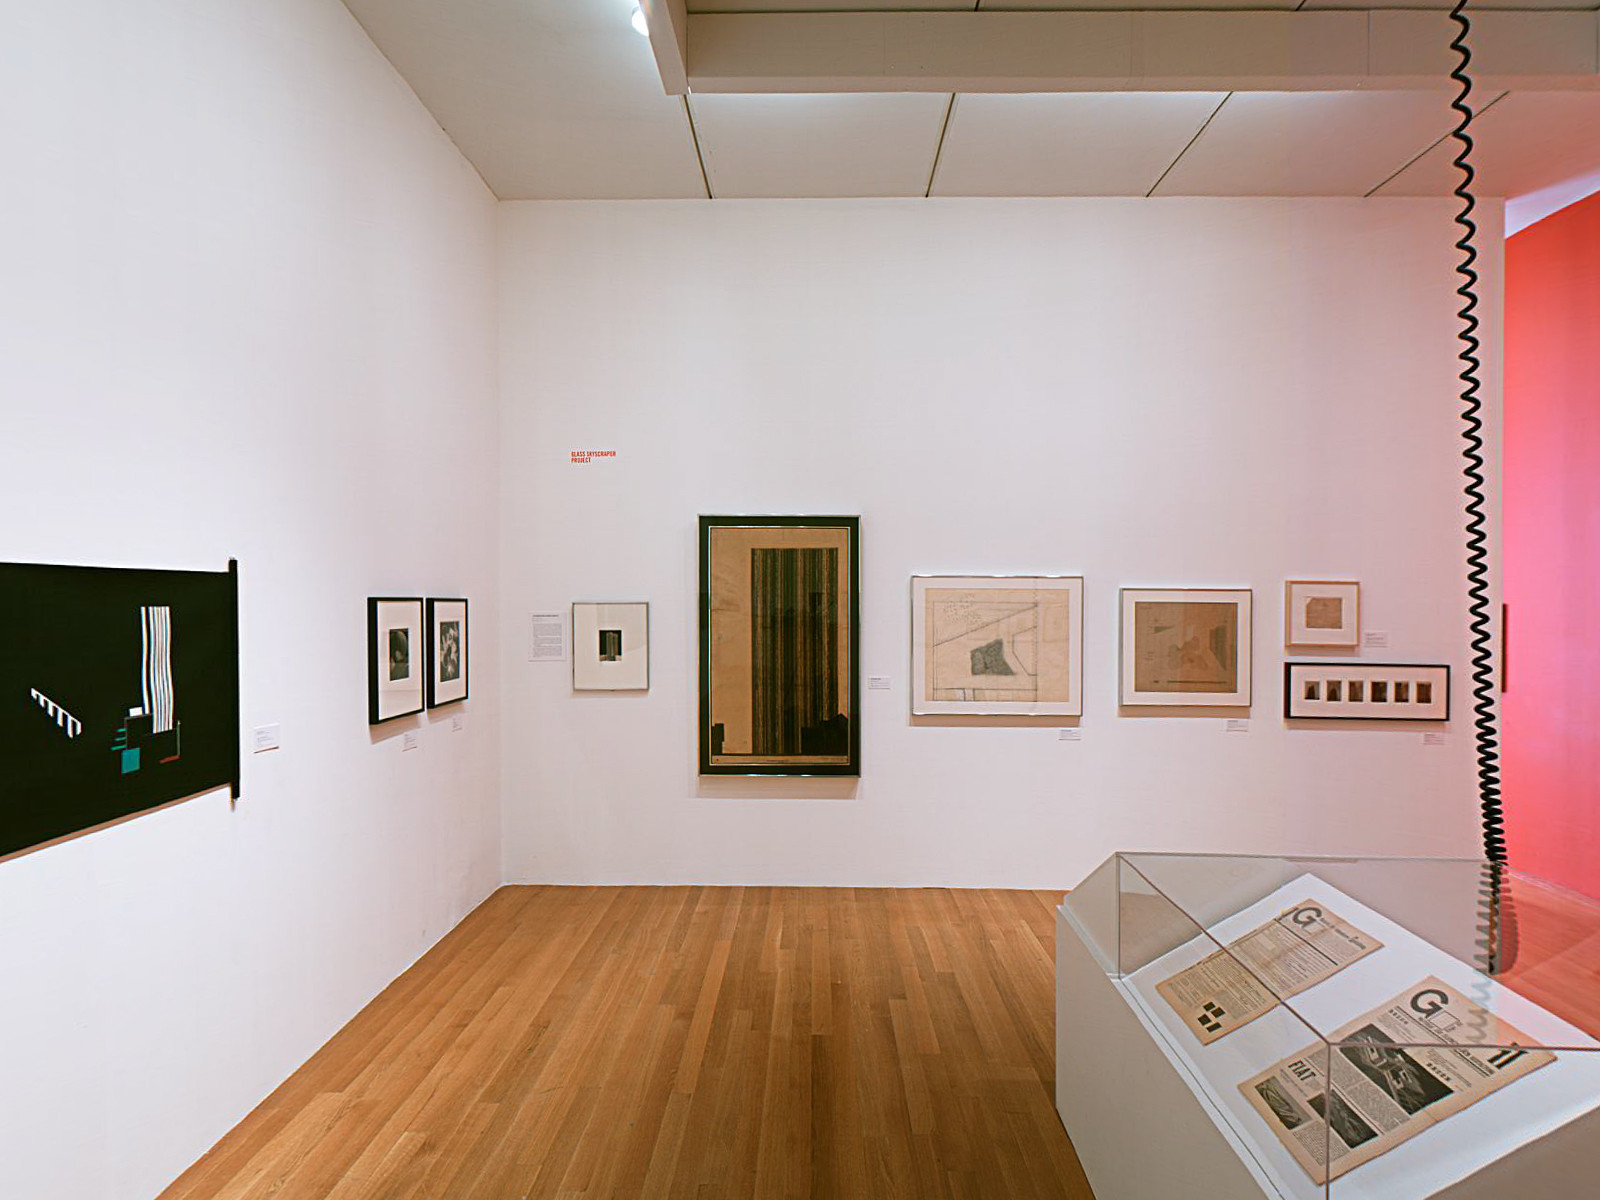 Installation view of the exhibition, "Mies in MoMA